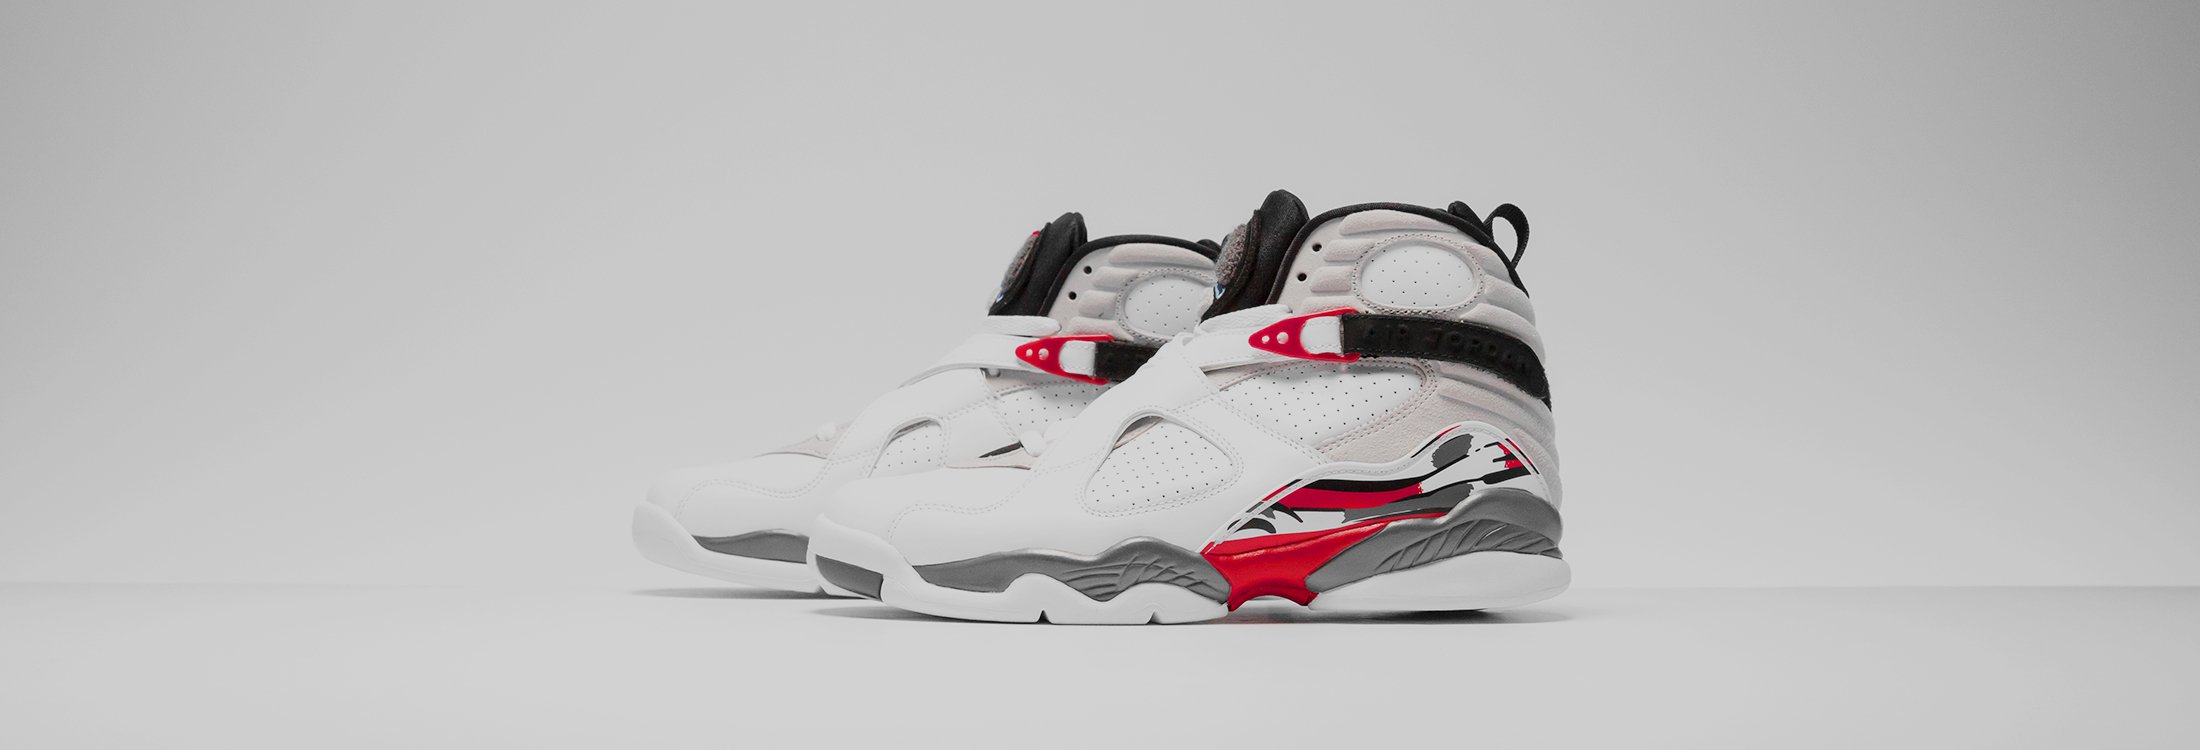 Air Jordan 8 “Playoffs” now available online !